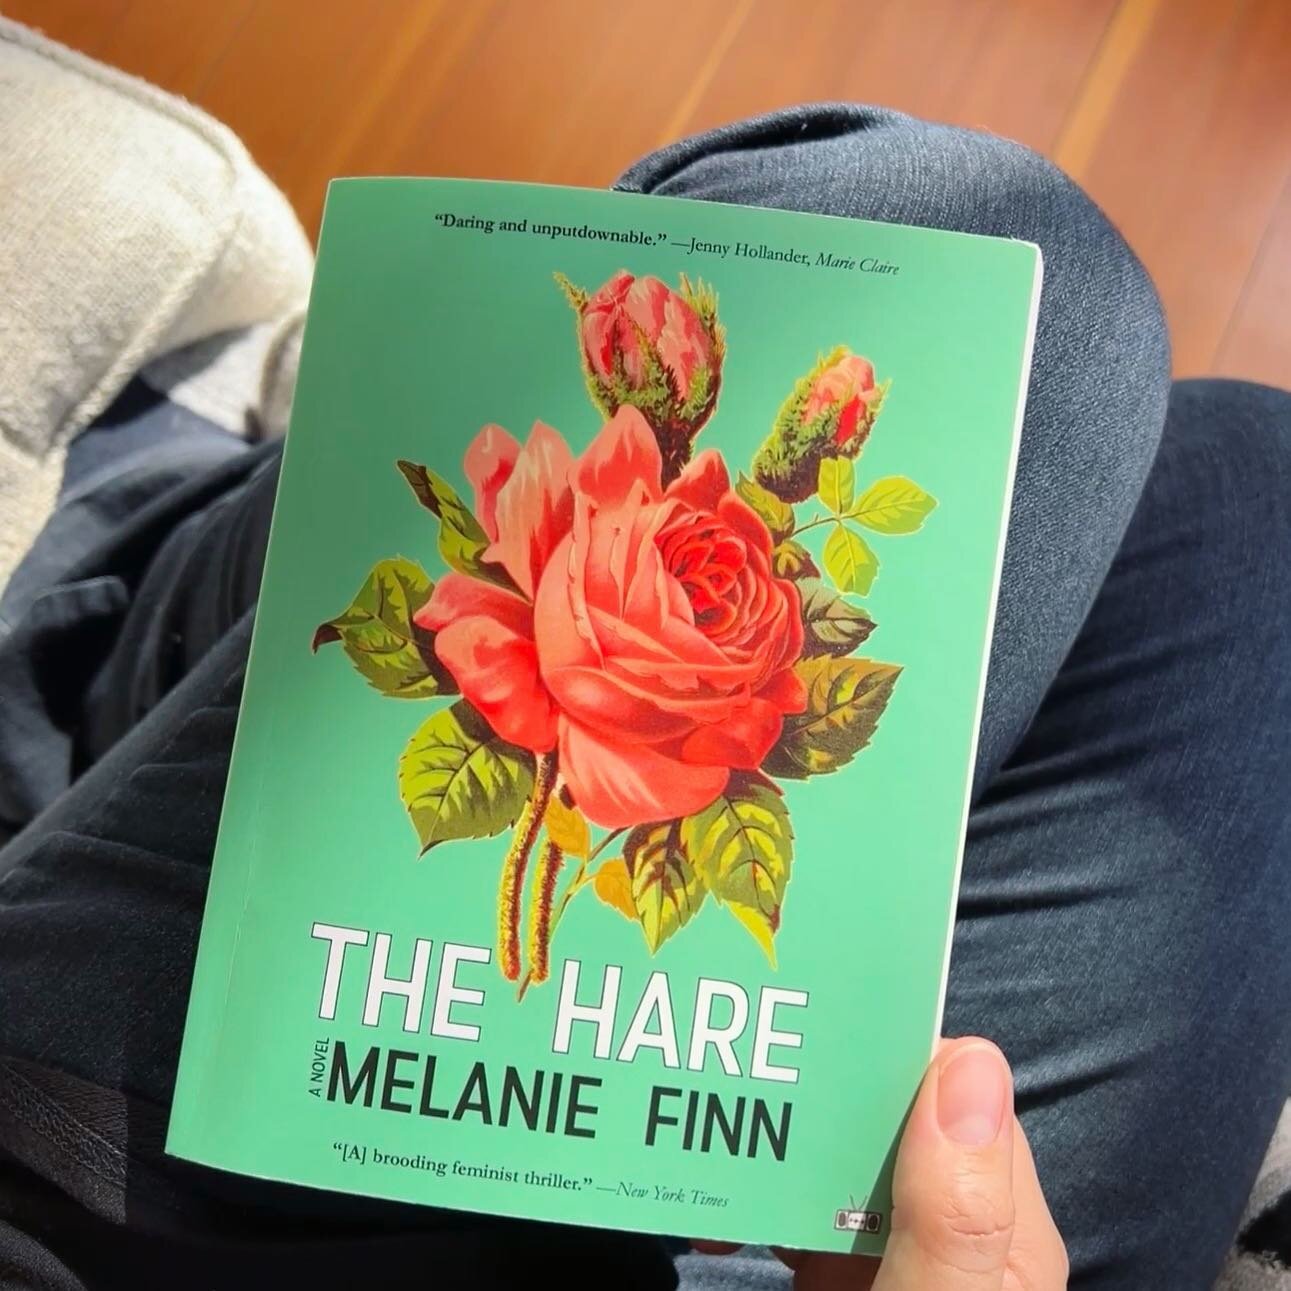 This cover, right?

The Hare by Melanie Finn is a whatever the opposite of a comfort read is&mdash;but it does it&rsquo;s discomfort so well. Rose, a young woman on the verge of one sort of future, is ripped (drawn? dragged? flung?) into another one 